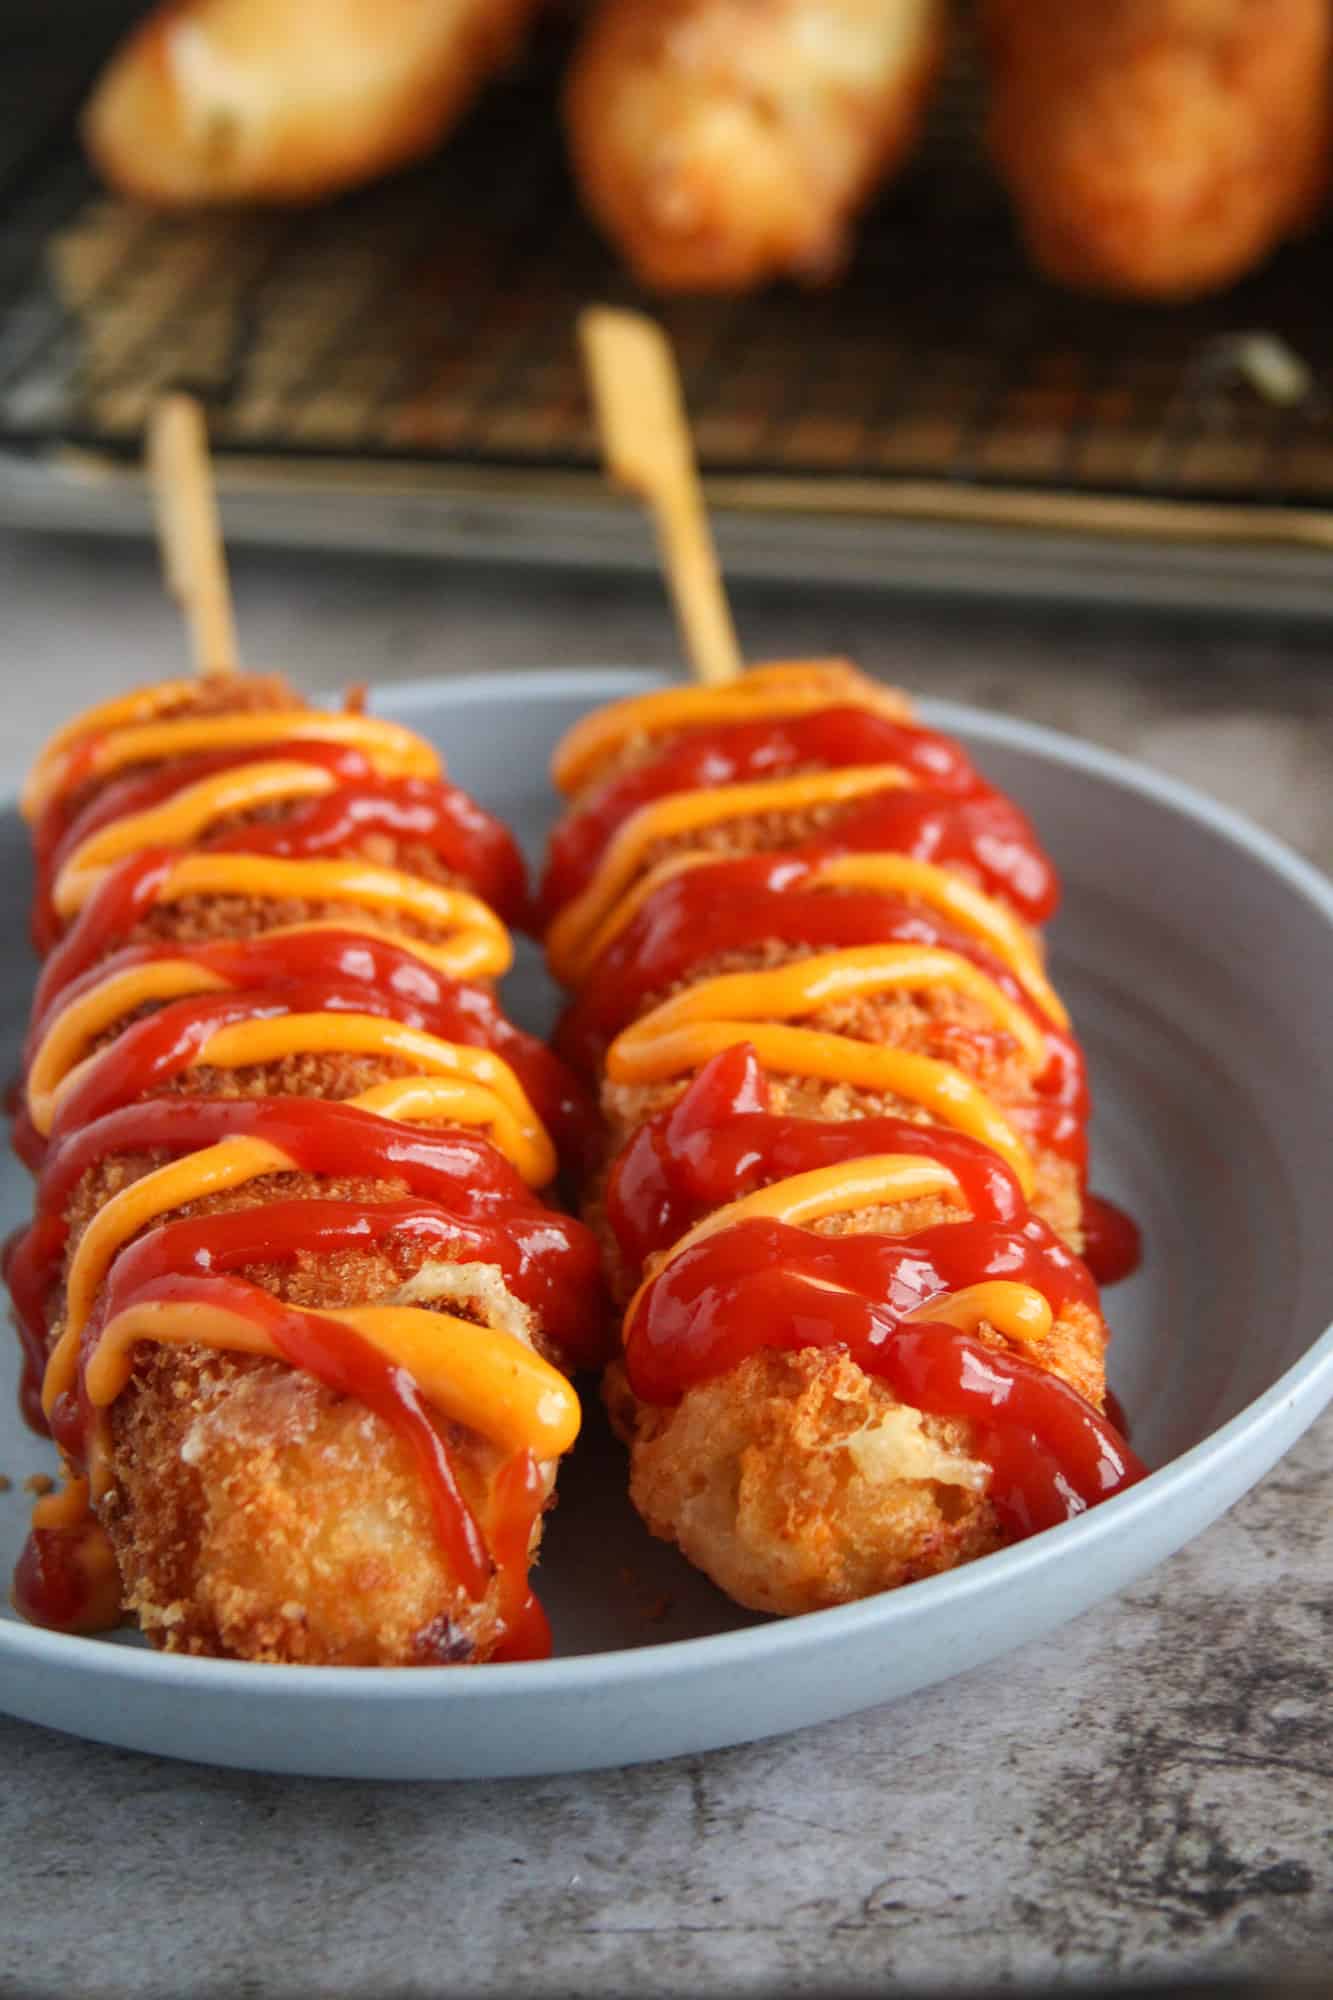 Two Korean Corn Dogs on a plate, drizzled with ketchup and sriracha mayo.